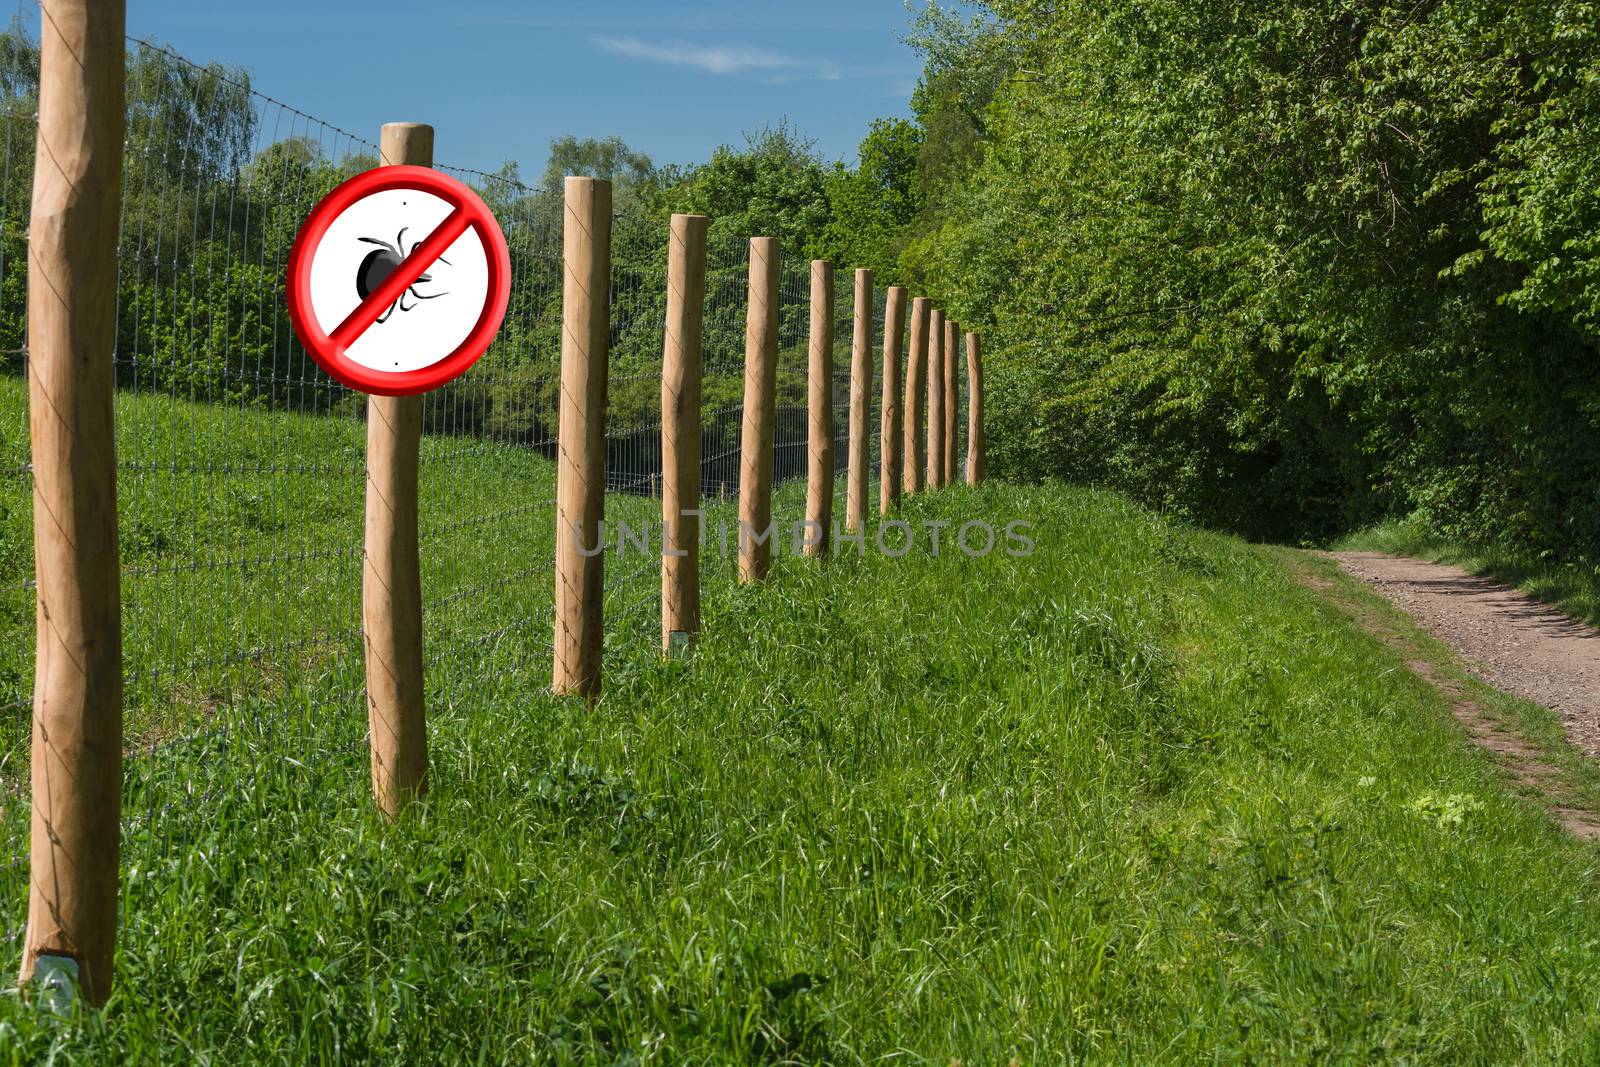 Red shield with crossed out ticks symbol on a fence post in front of a green meadow. Concept Ticks free zone
              
